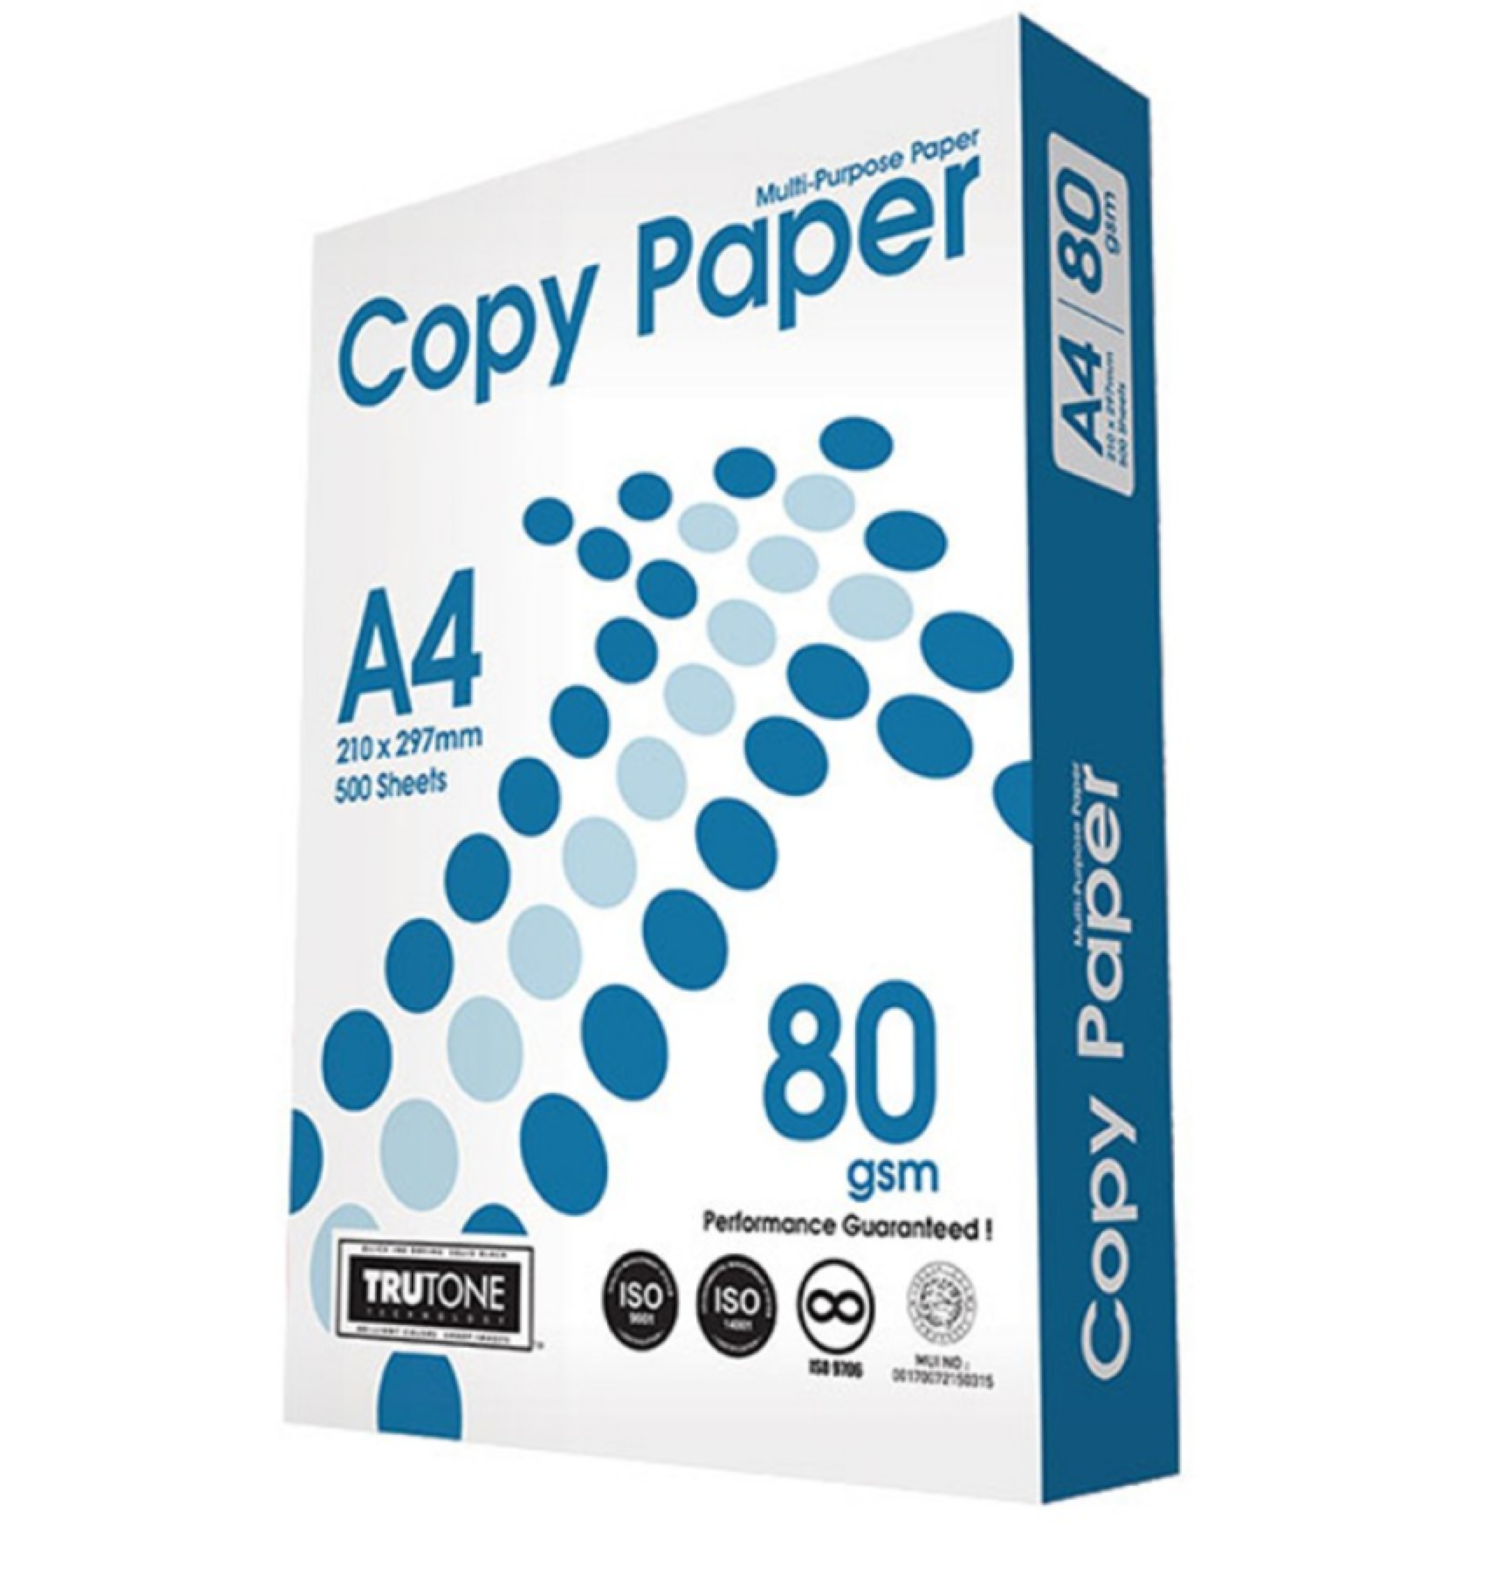 what size is copy paper